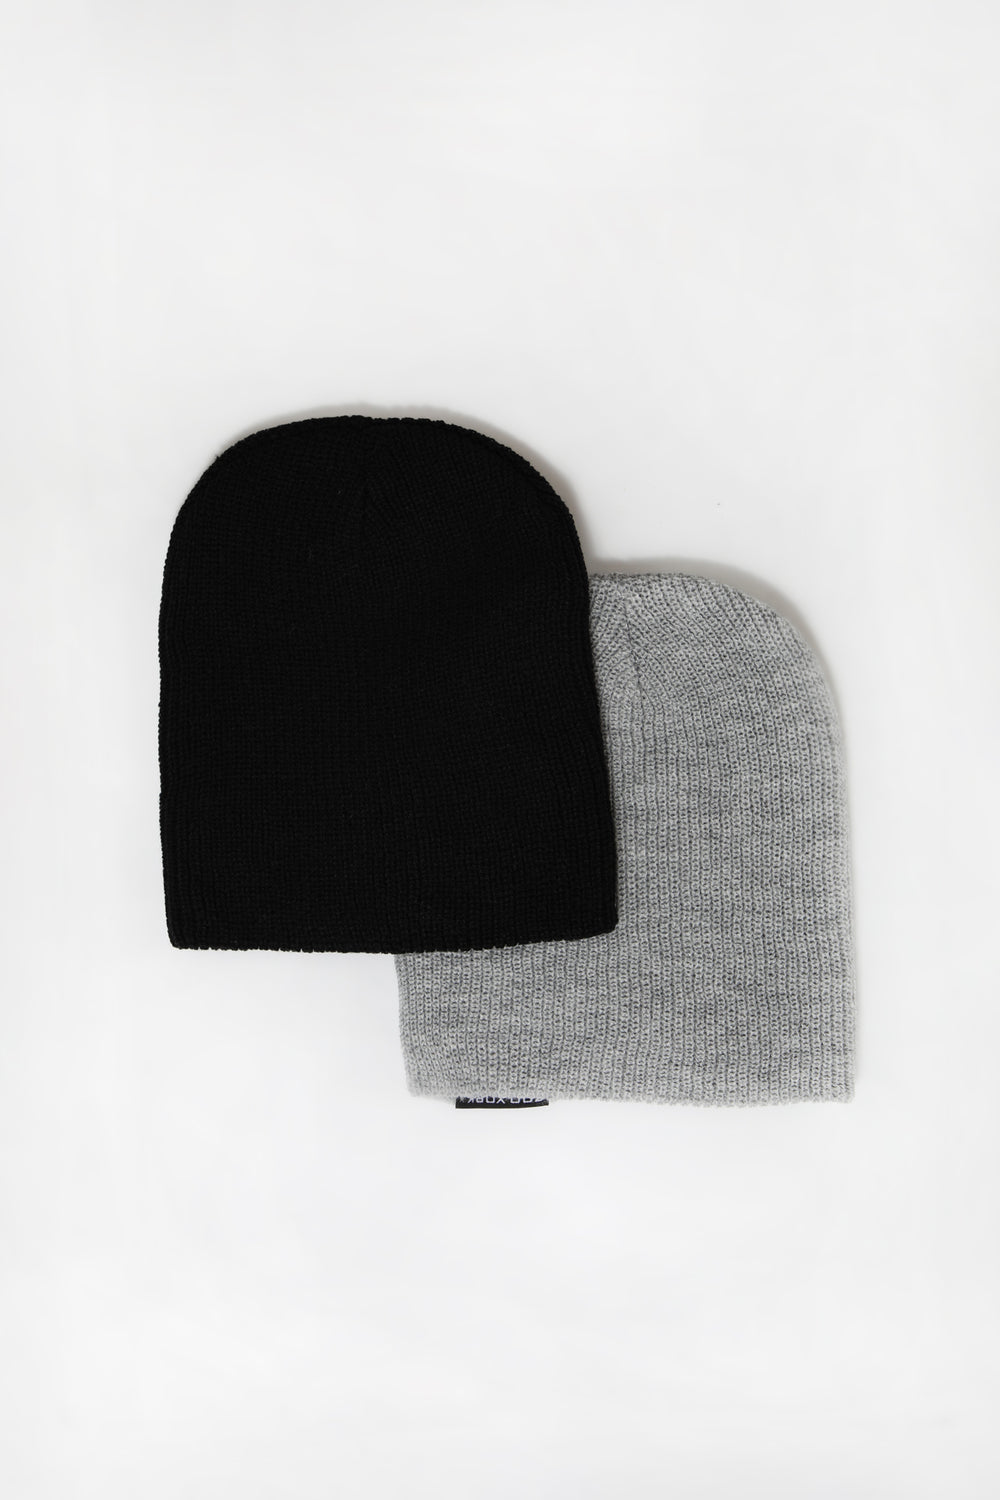 Zoo York Youth Slouch Beanie 2-Pack Heather Grey